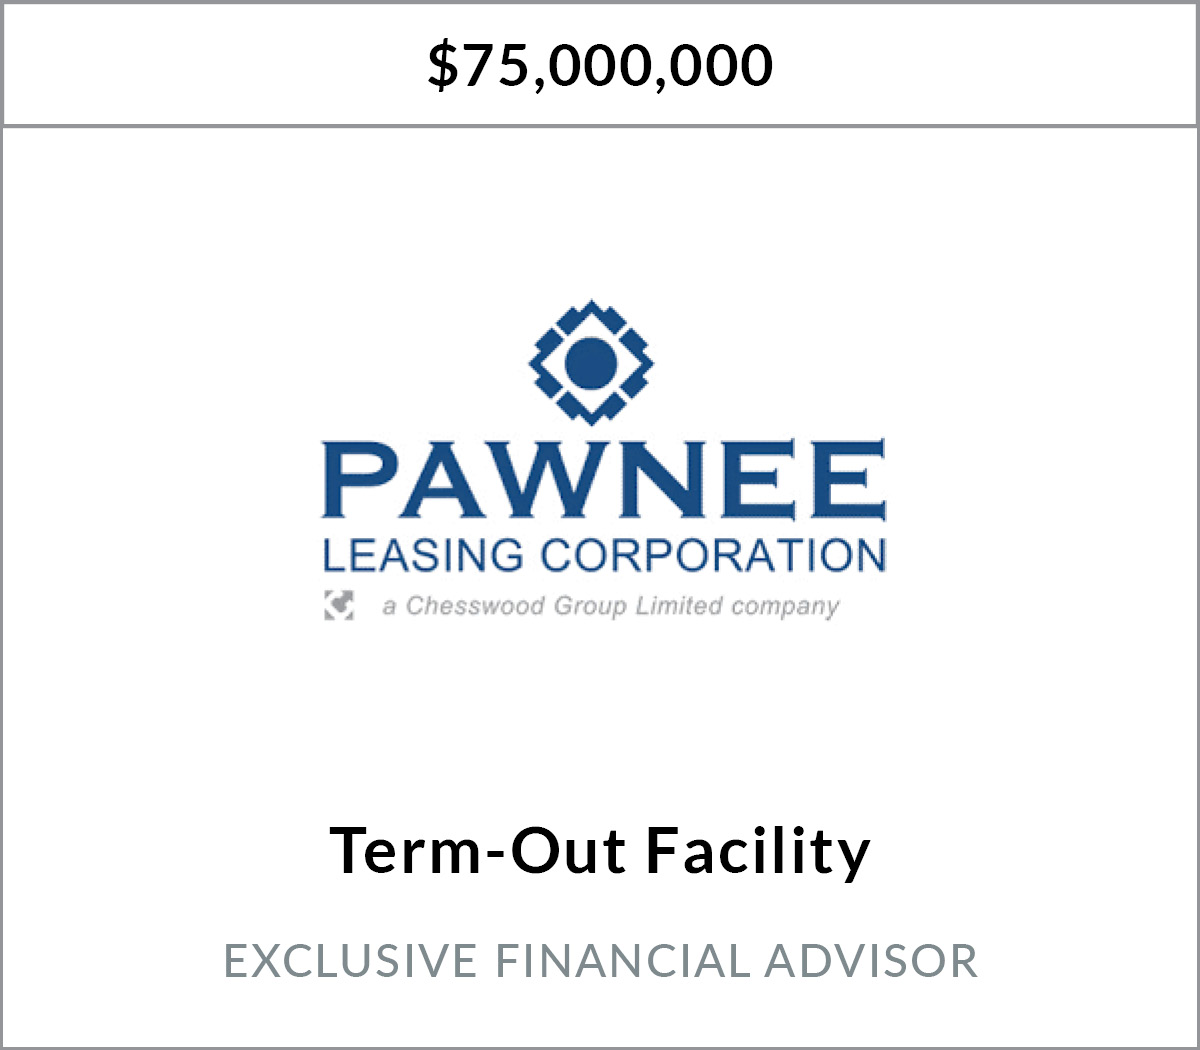 Bryant Park Capital Acts As Exclusive Financial Advisor To Pawnee In Its First U.S. Securitization